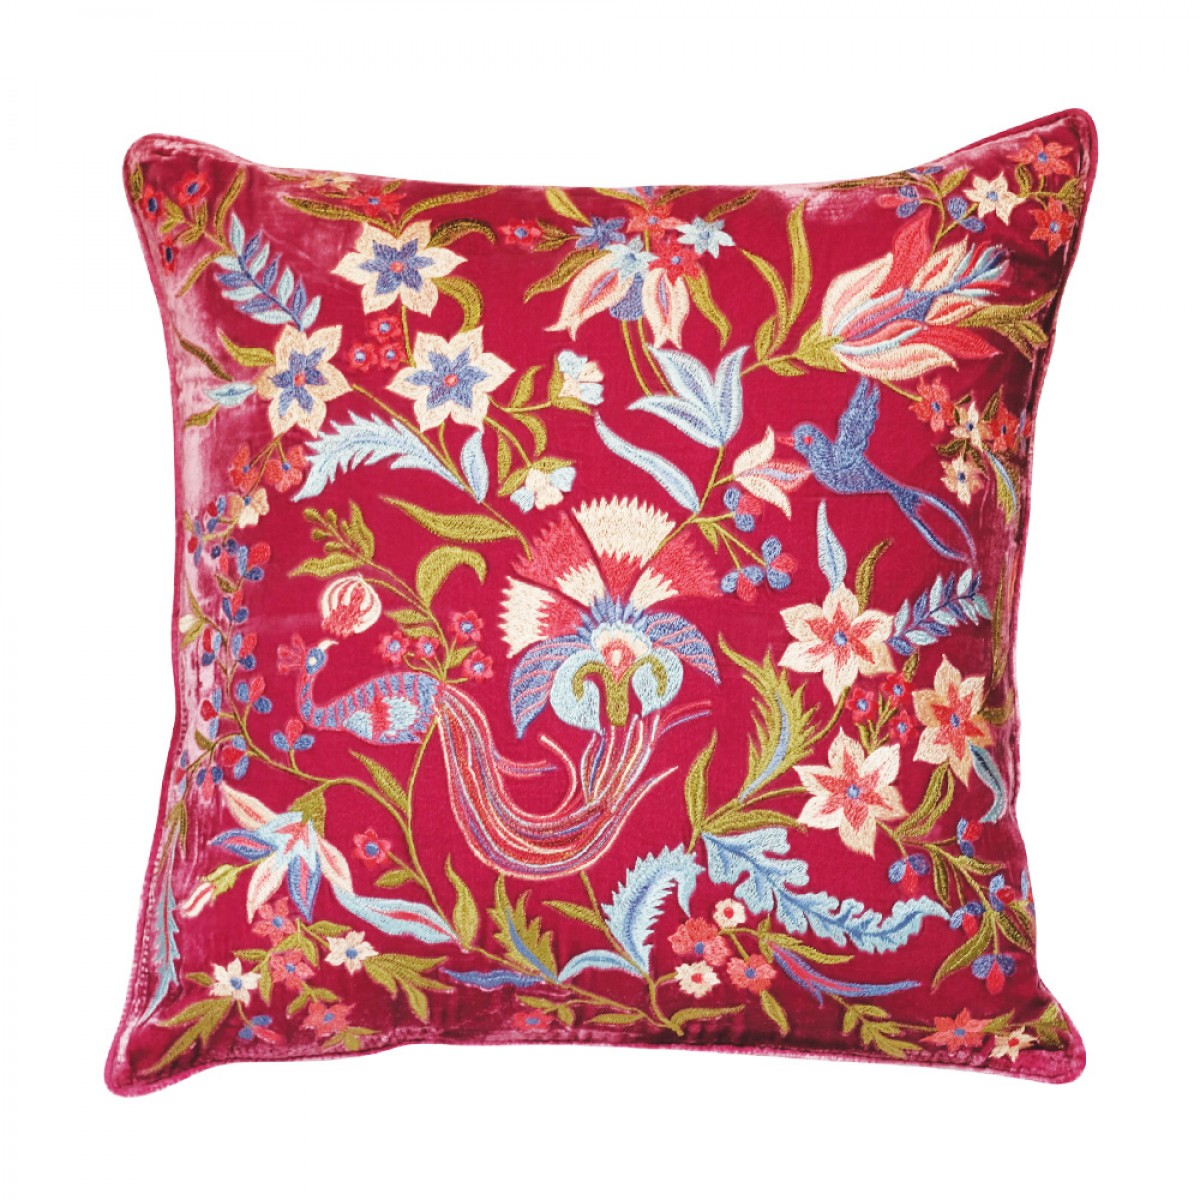 Designer Embroidered Cushion Cover - Maroon